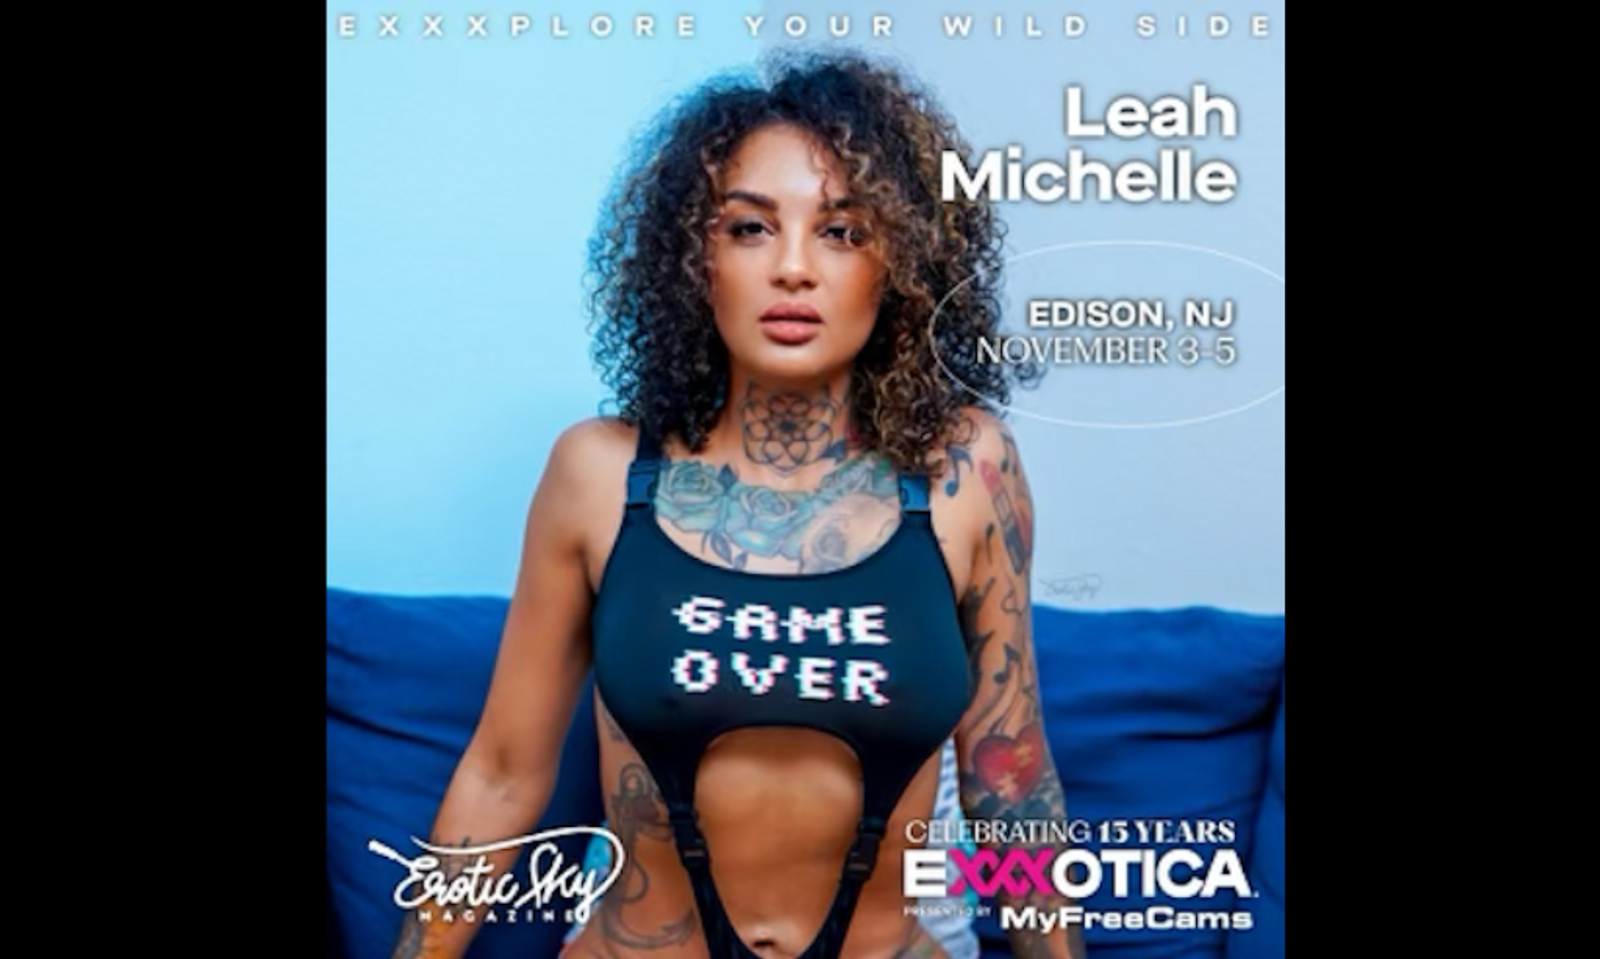 Leah Michelle to Sign at Erotic Sky & AltErotic at Exxxotica NJ